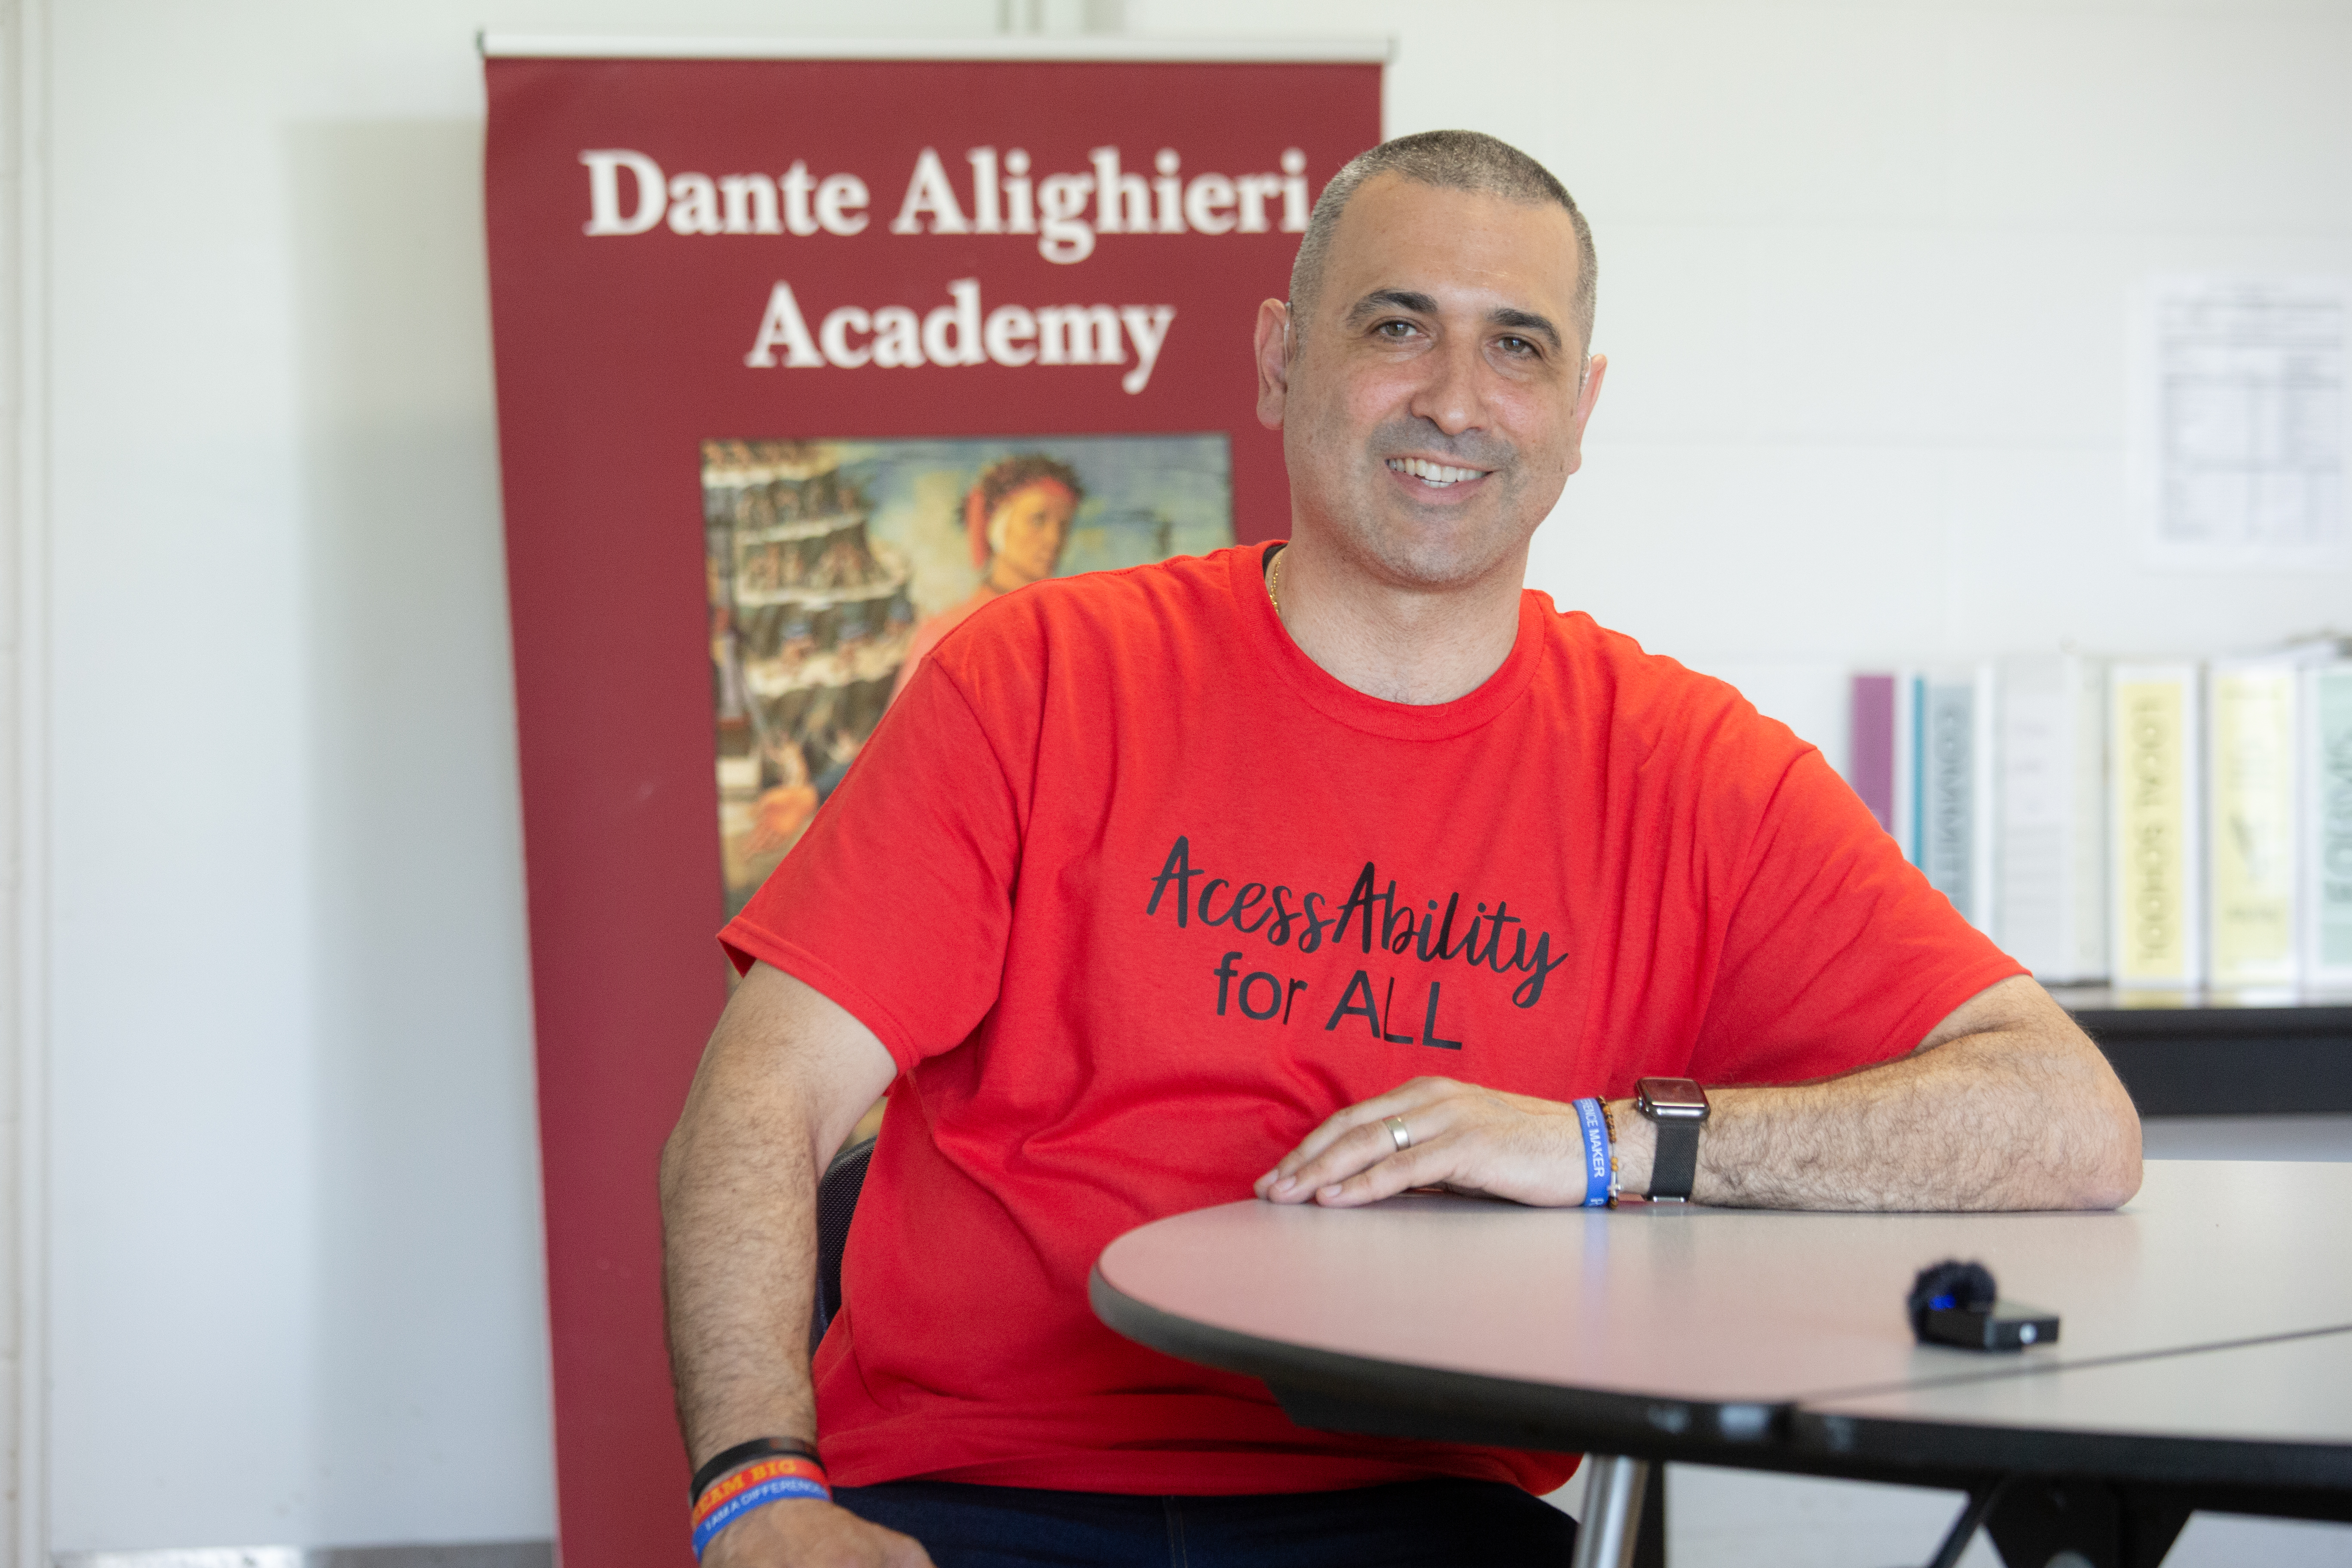 Angelo sitting at a table smiling and wearing a red t-shirt that says AccessAbility for all. There is a banner behind him that says Dante Aligheri Academy